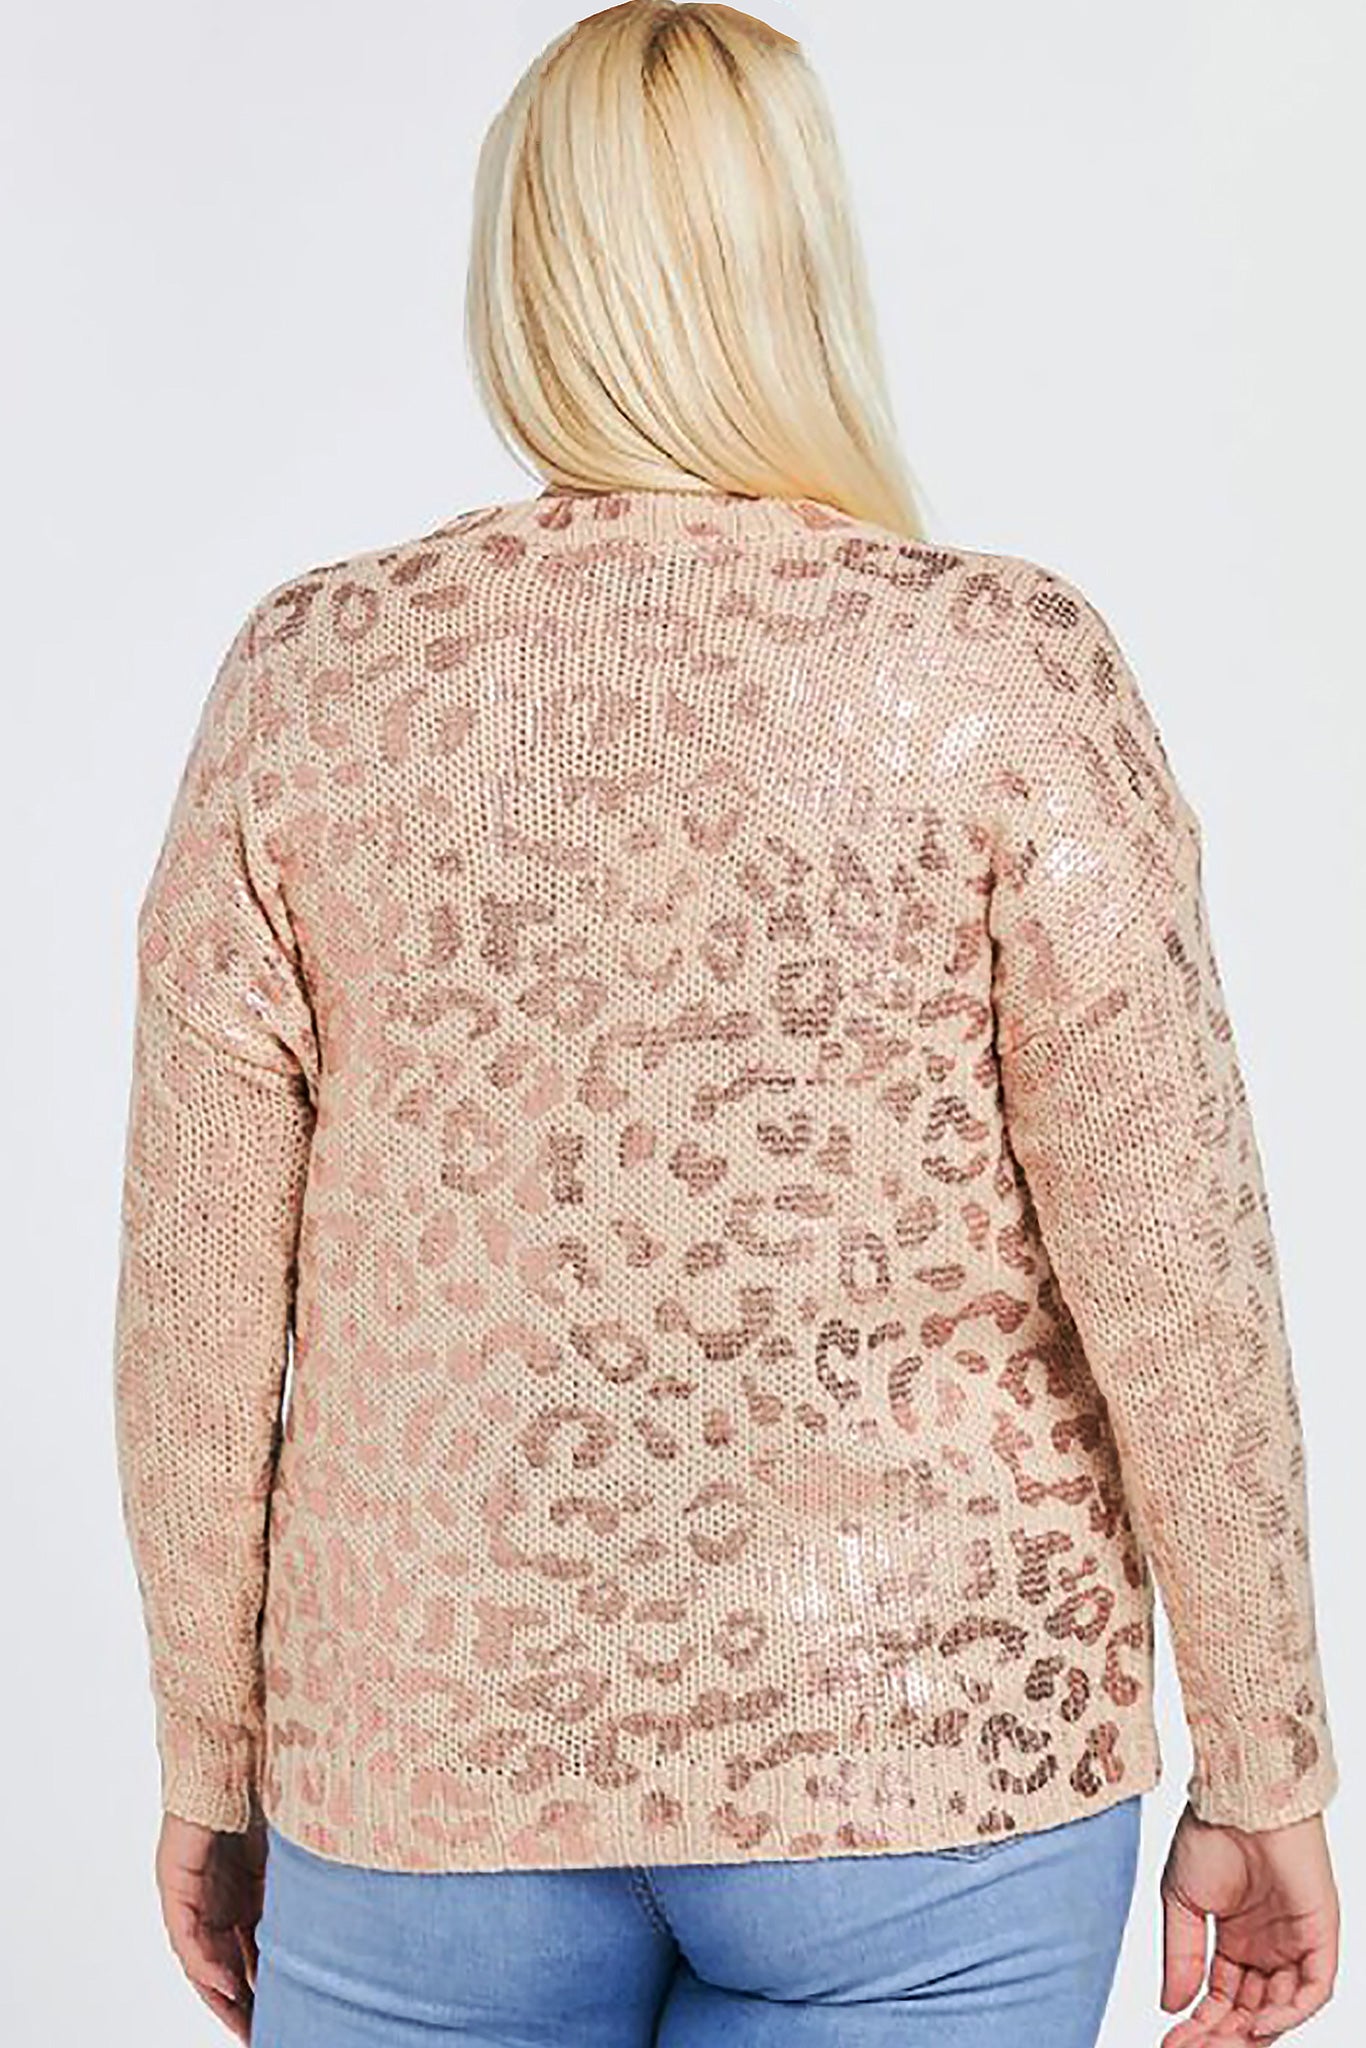 Chloe Leopard Foil Print Sweater in Pink- Back view on Model- Belle and Broome